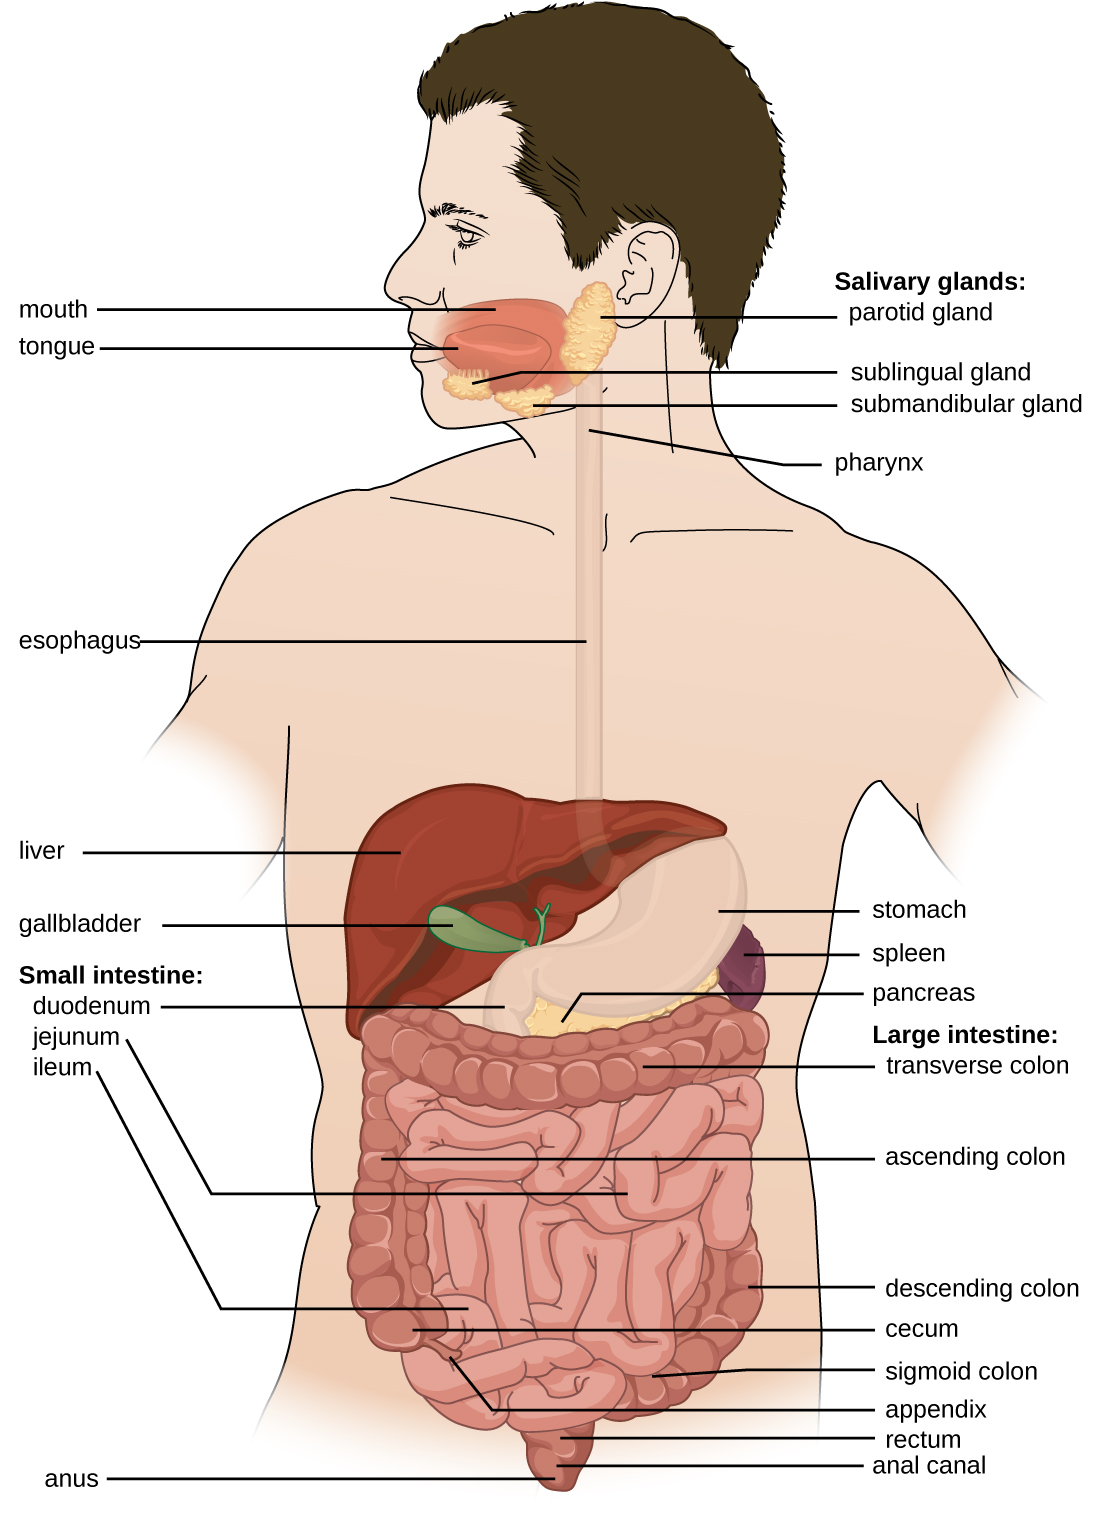 Anatomy and Normal Microbiota of the Digestive System ...